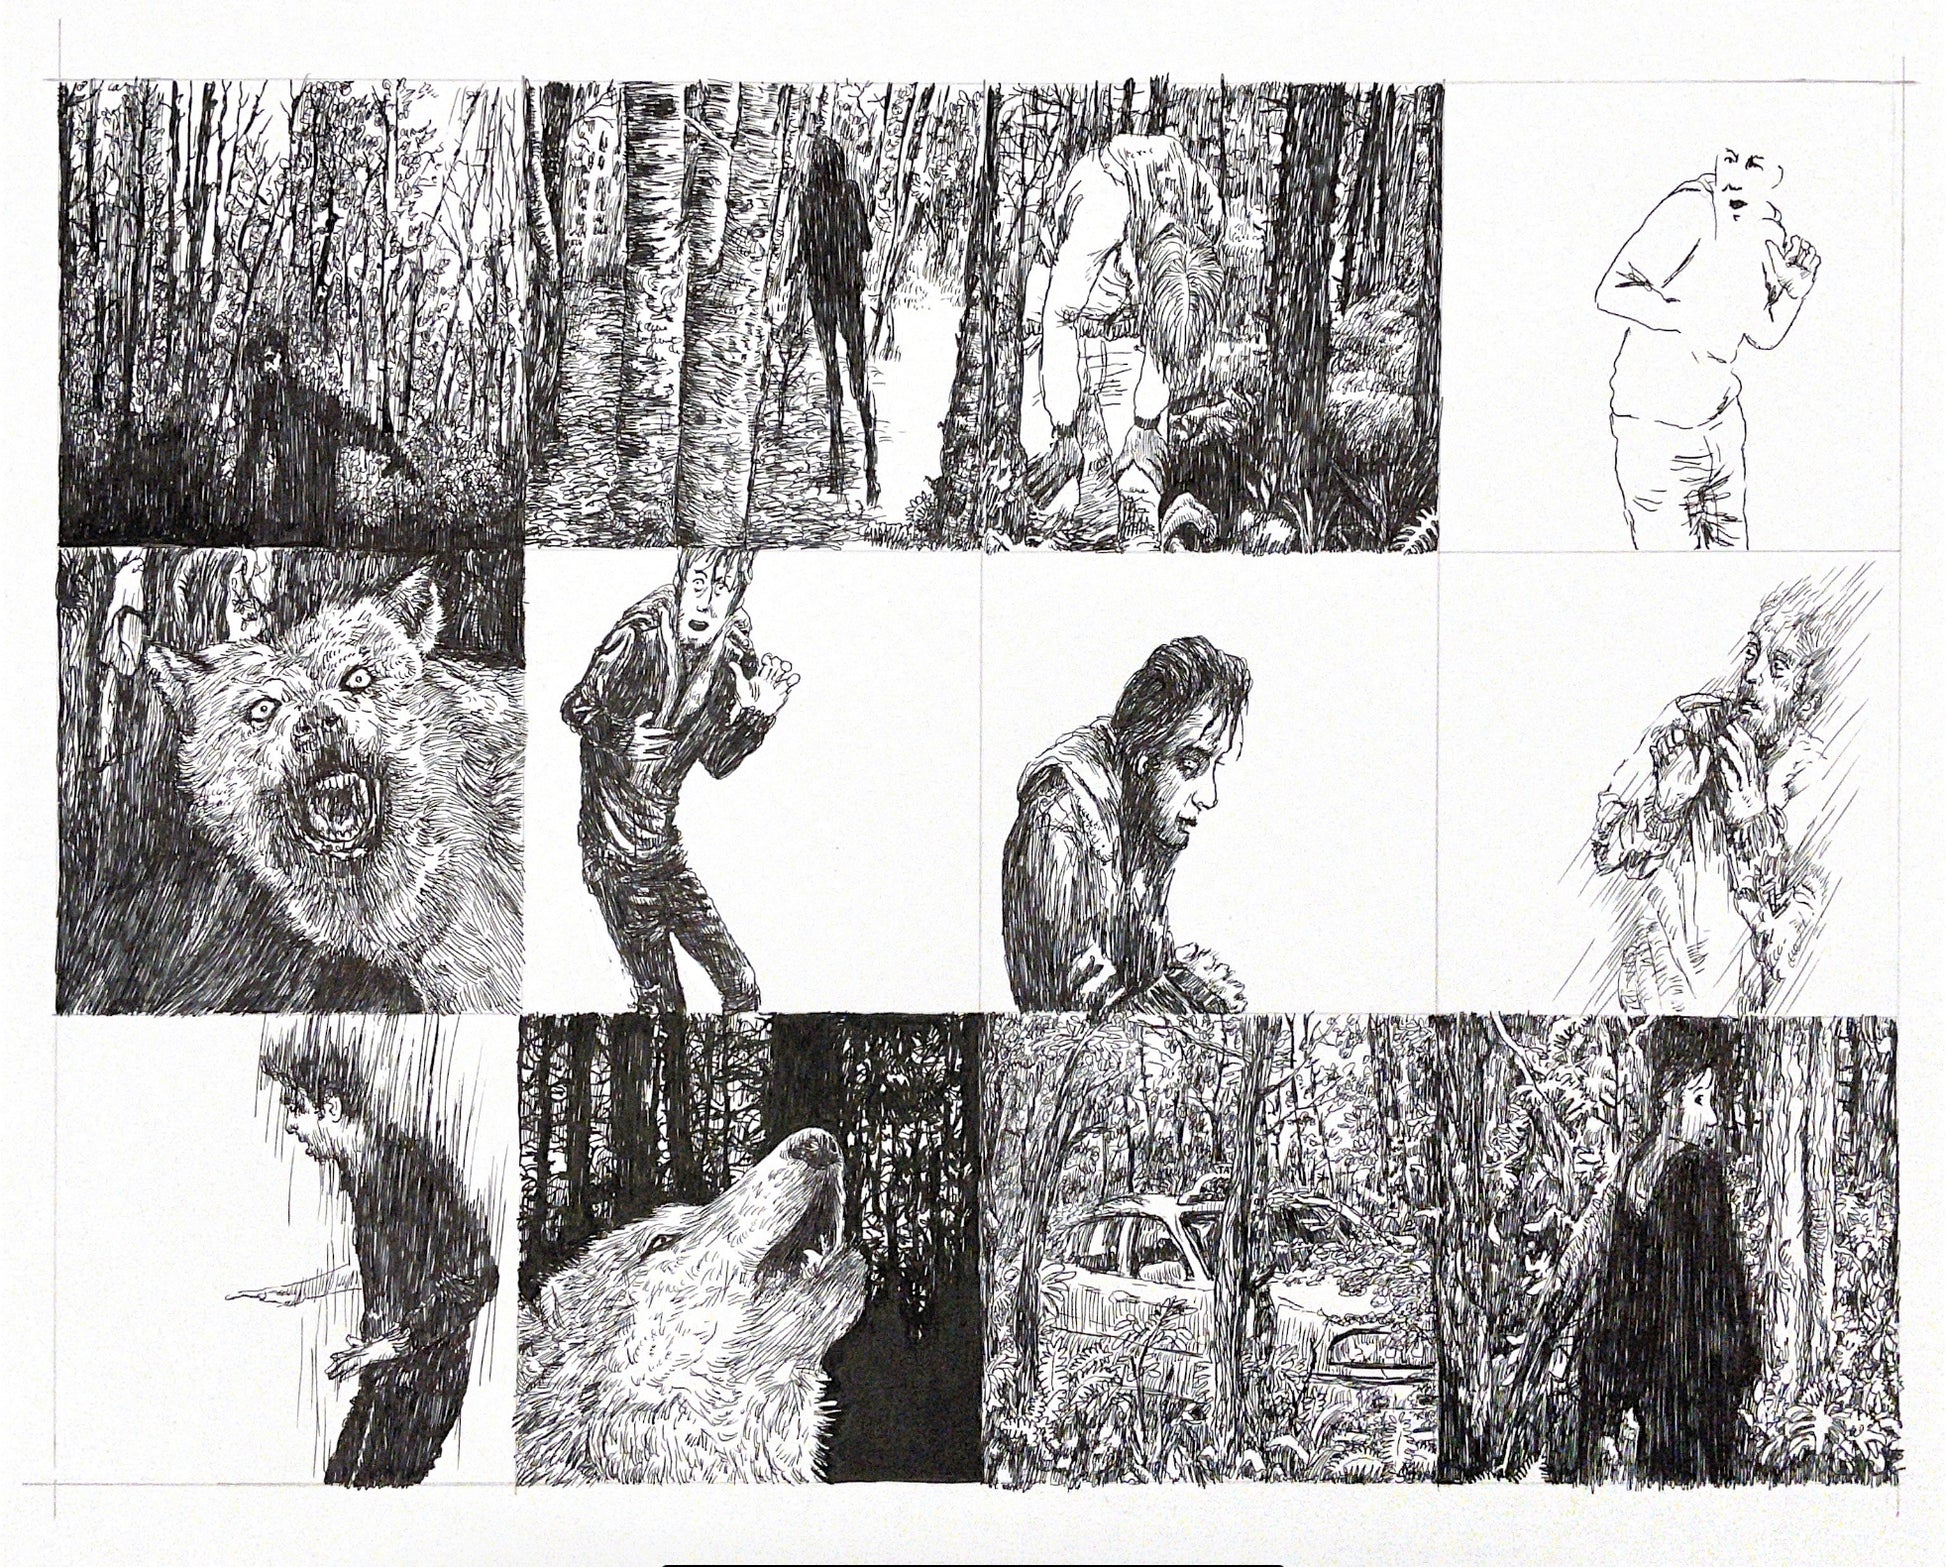 Graphic novel panels, featuring ink drawings, people, wolves, woods and movement.